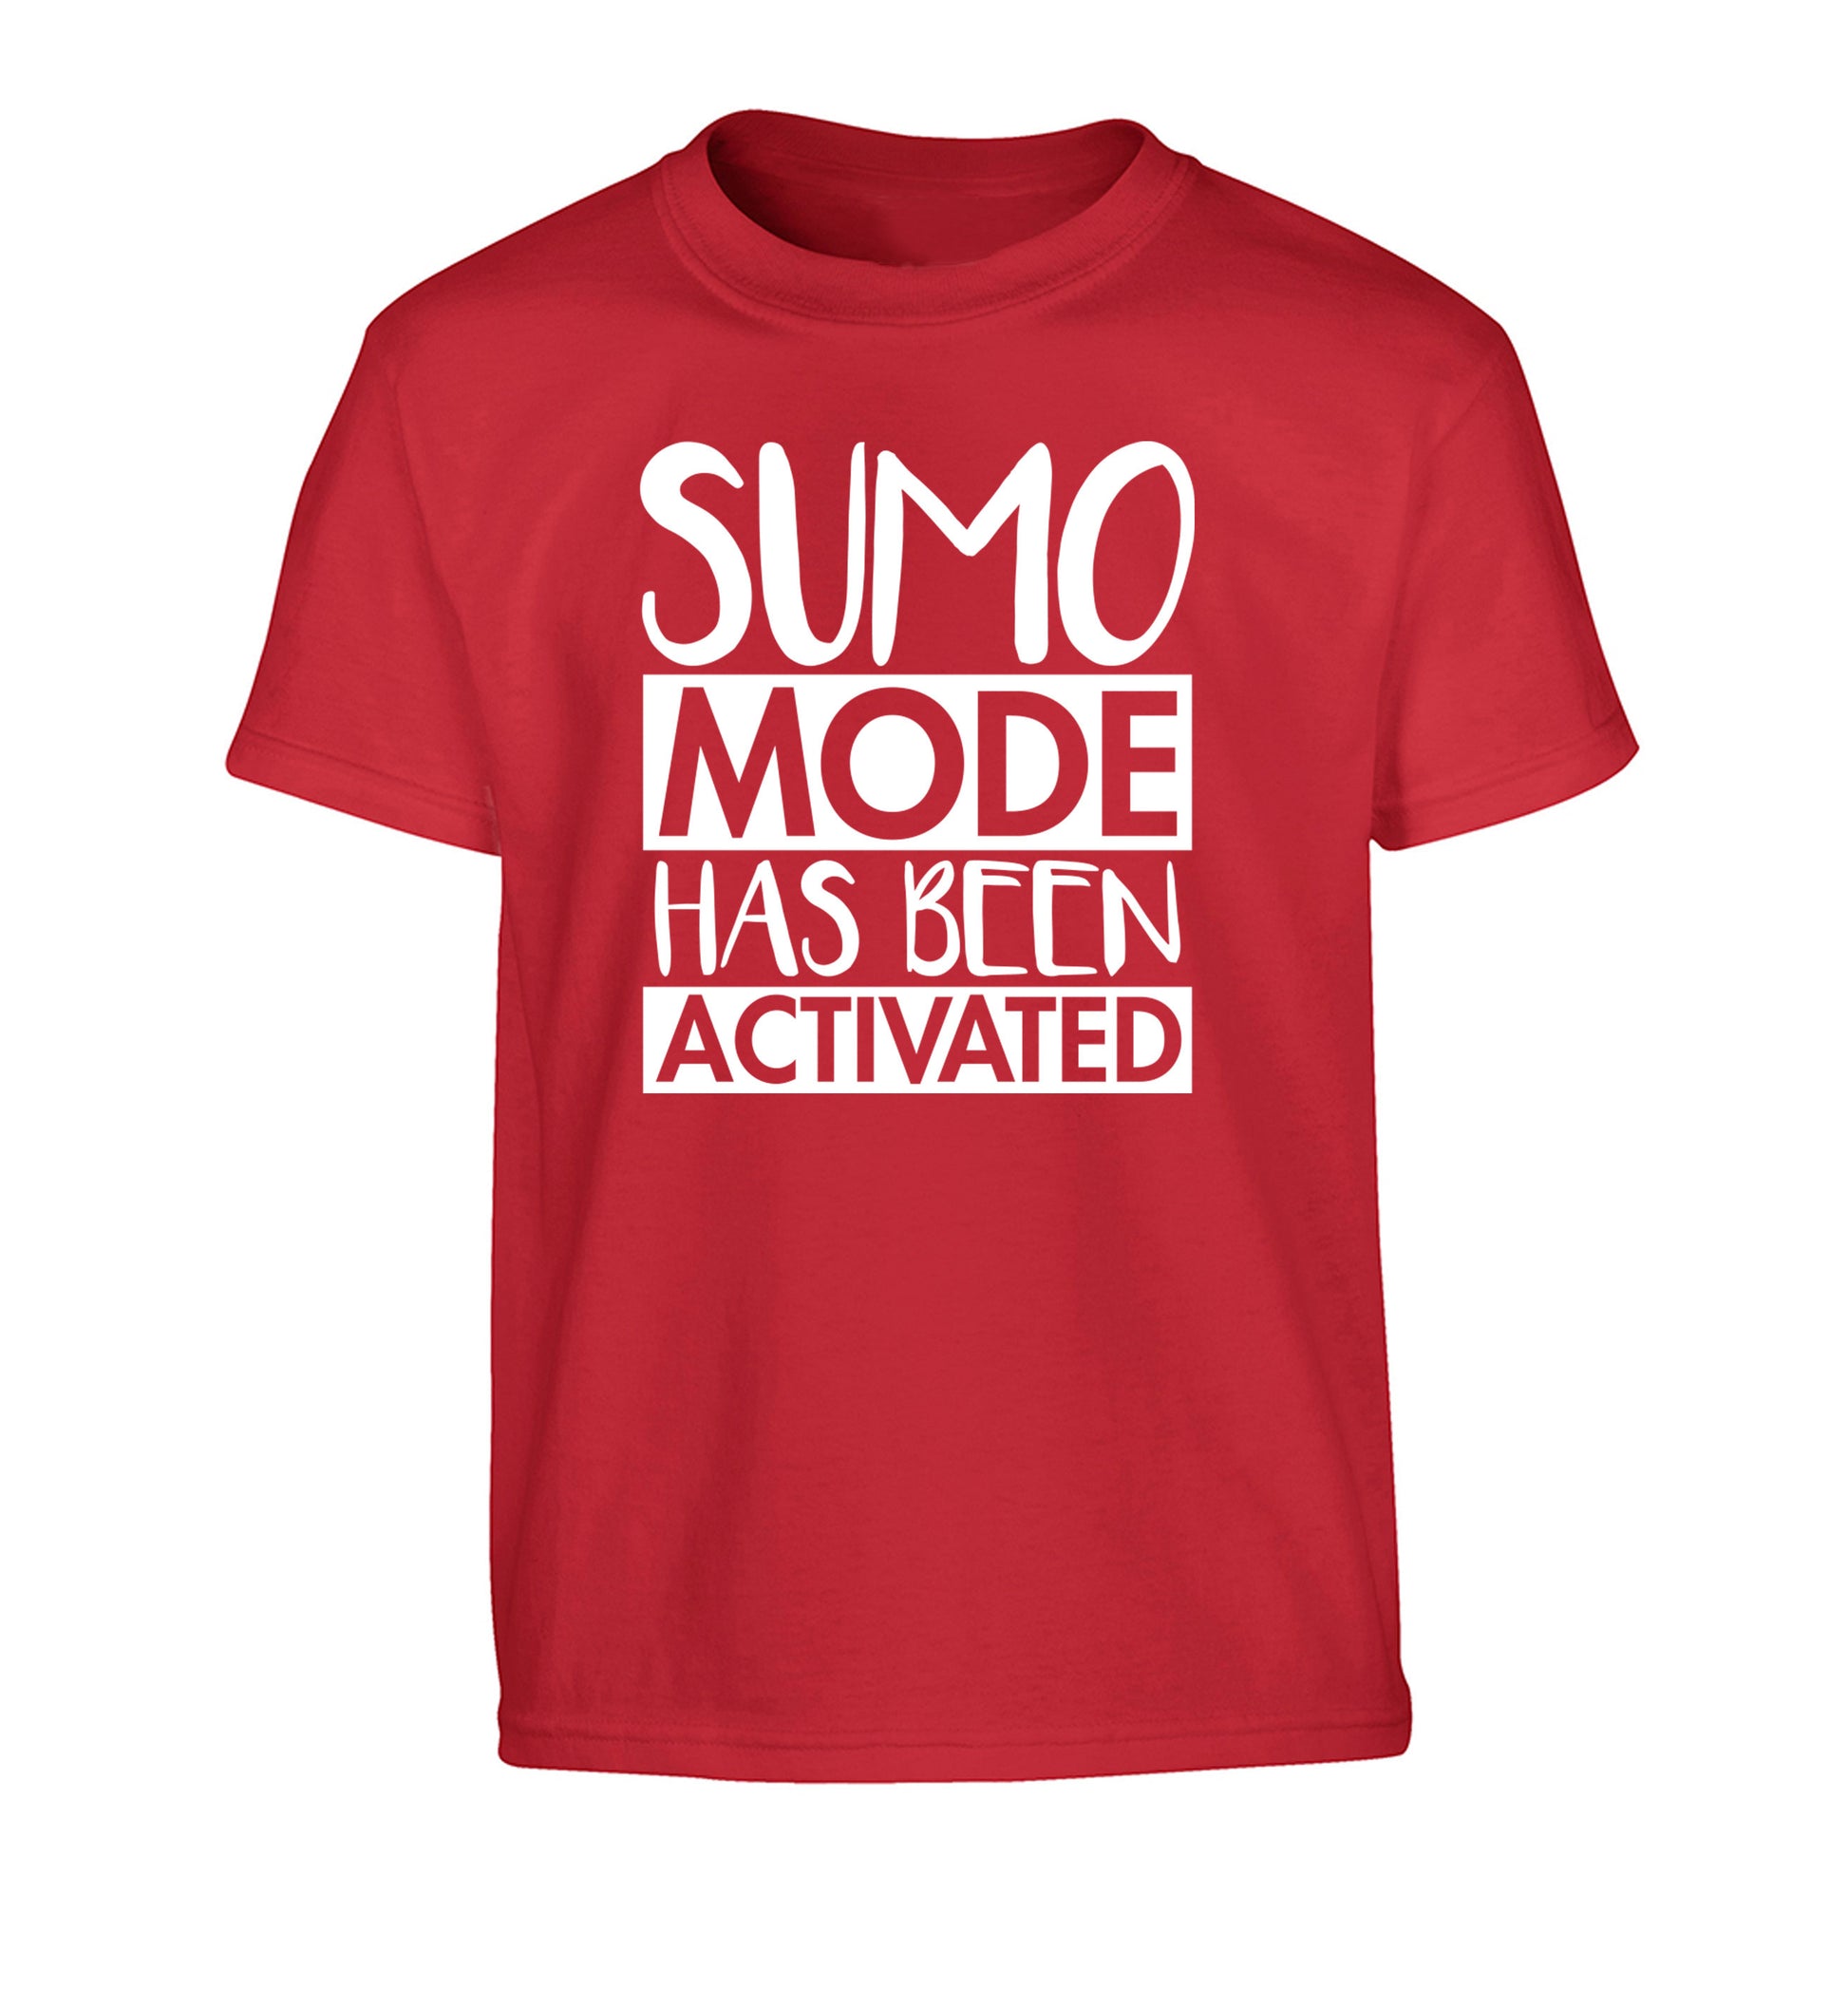 Sumo mode activated Children's red Tshirt 12-14 Years